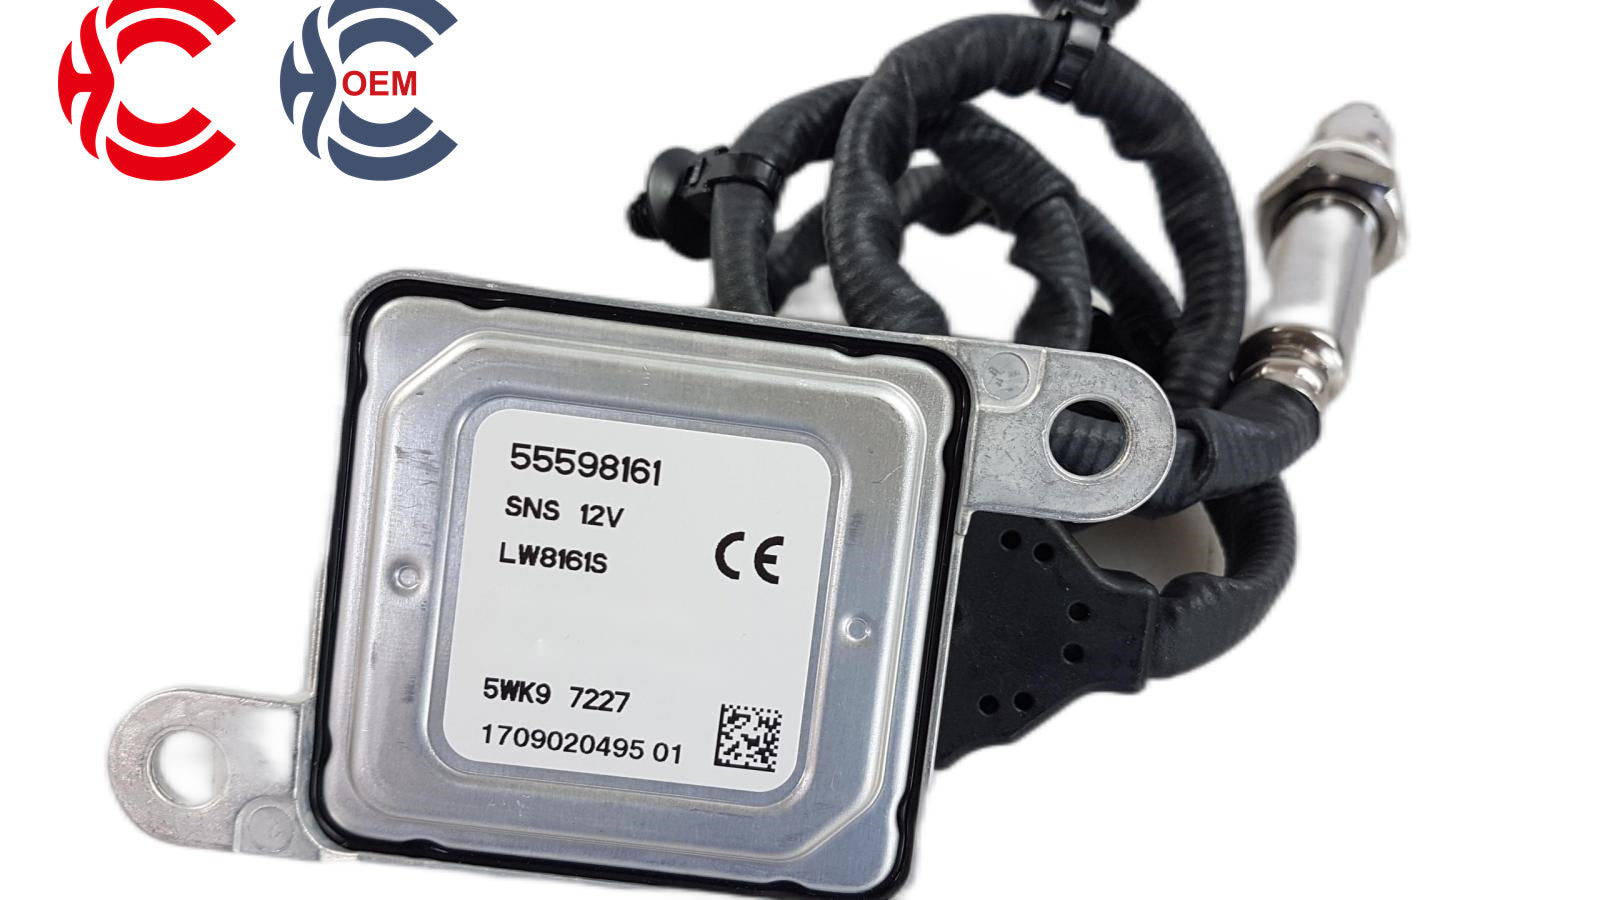 OEM: 5WK9 7227 55598161Material: ABS metalColor: black silverOrigin: Made in ChinaWeight: 400gPacking List: 1* Nitrogen oxide sensor NOx More ServiceWe can provide OEM Manufacturing serviceWe can Be your one-step solution for Auto PartsWe can provide technical scheme for you Feel Free to Contact Us, We will get back to you as soon as possible.